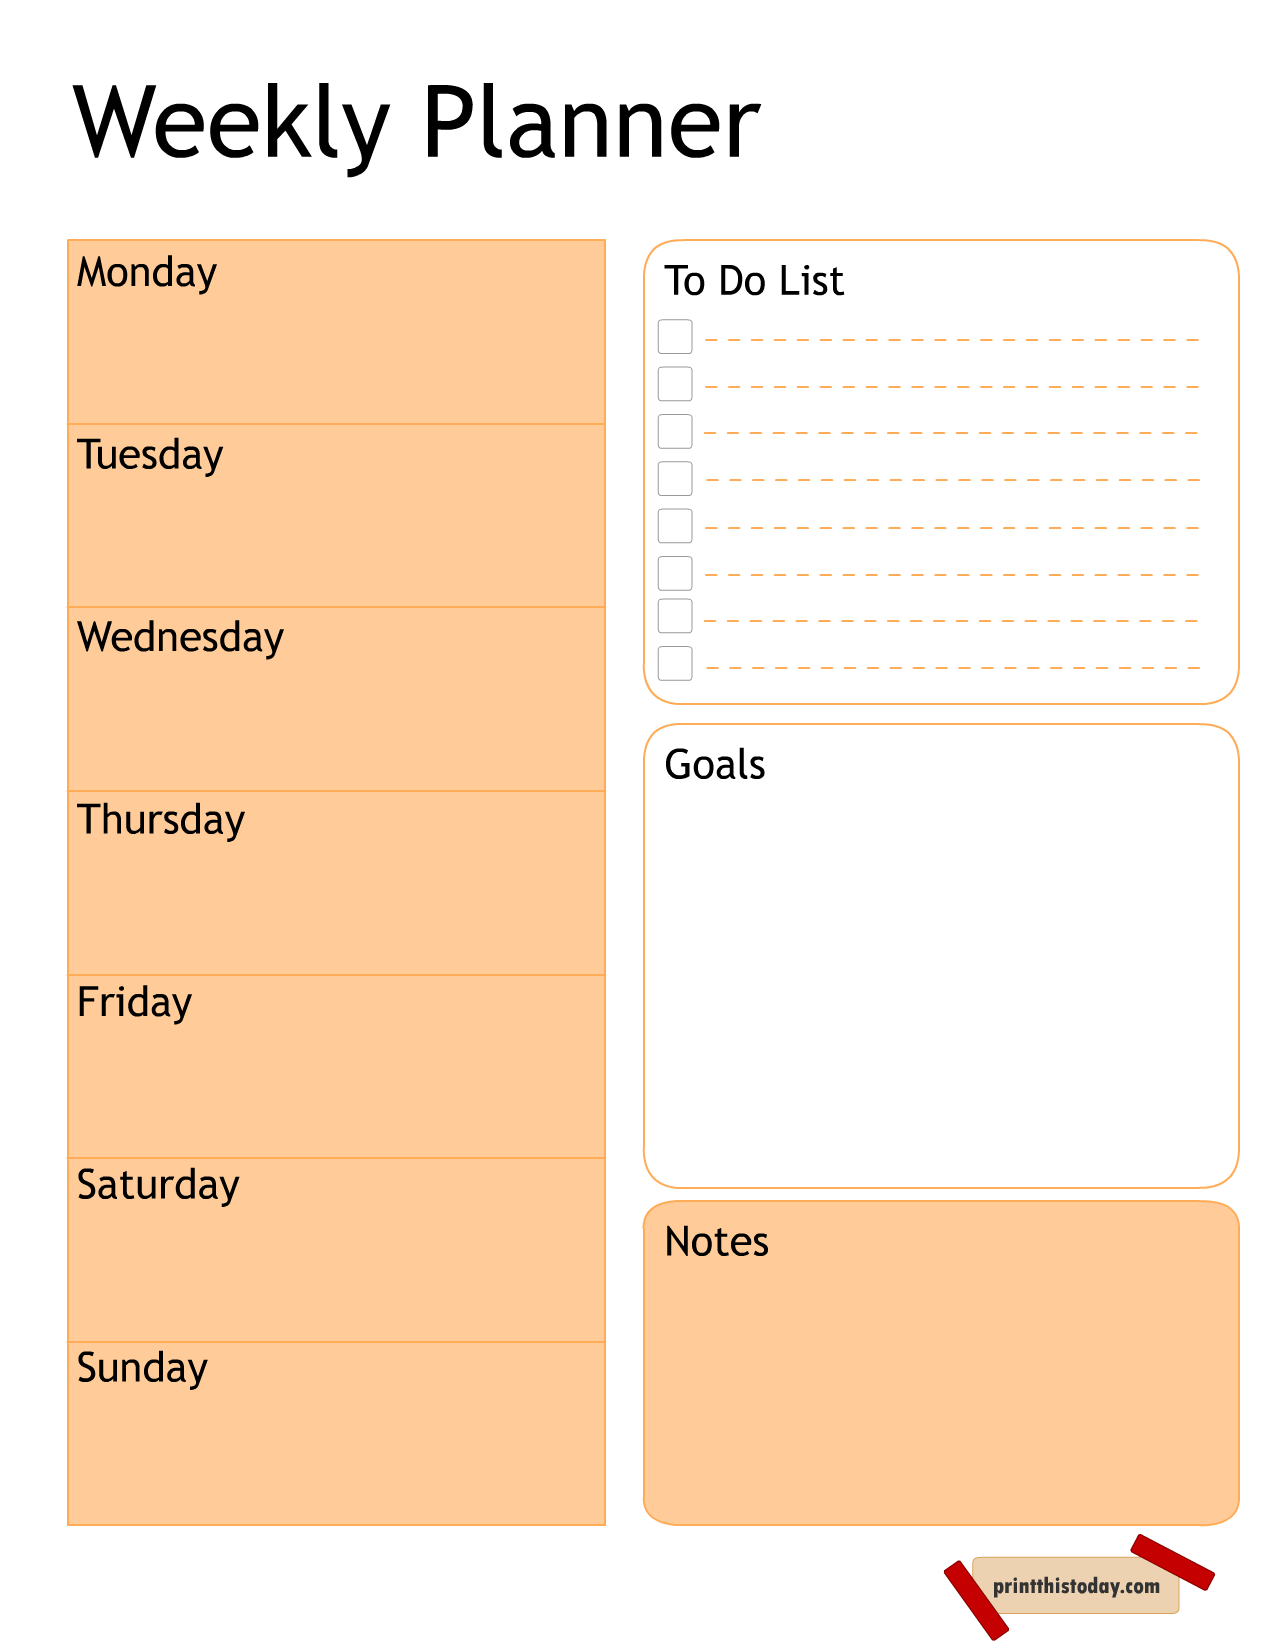 Printable Weekly Planner Page in Peach and White Colors